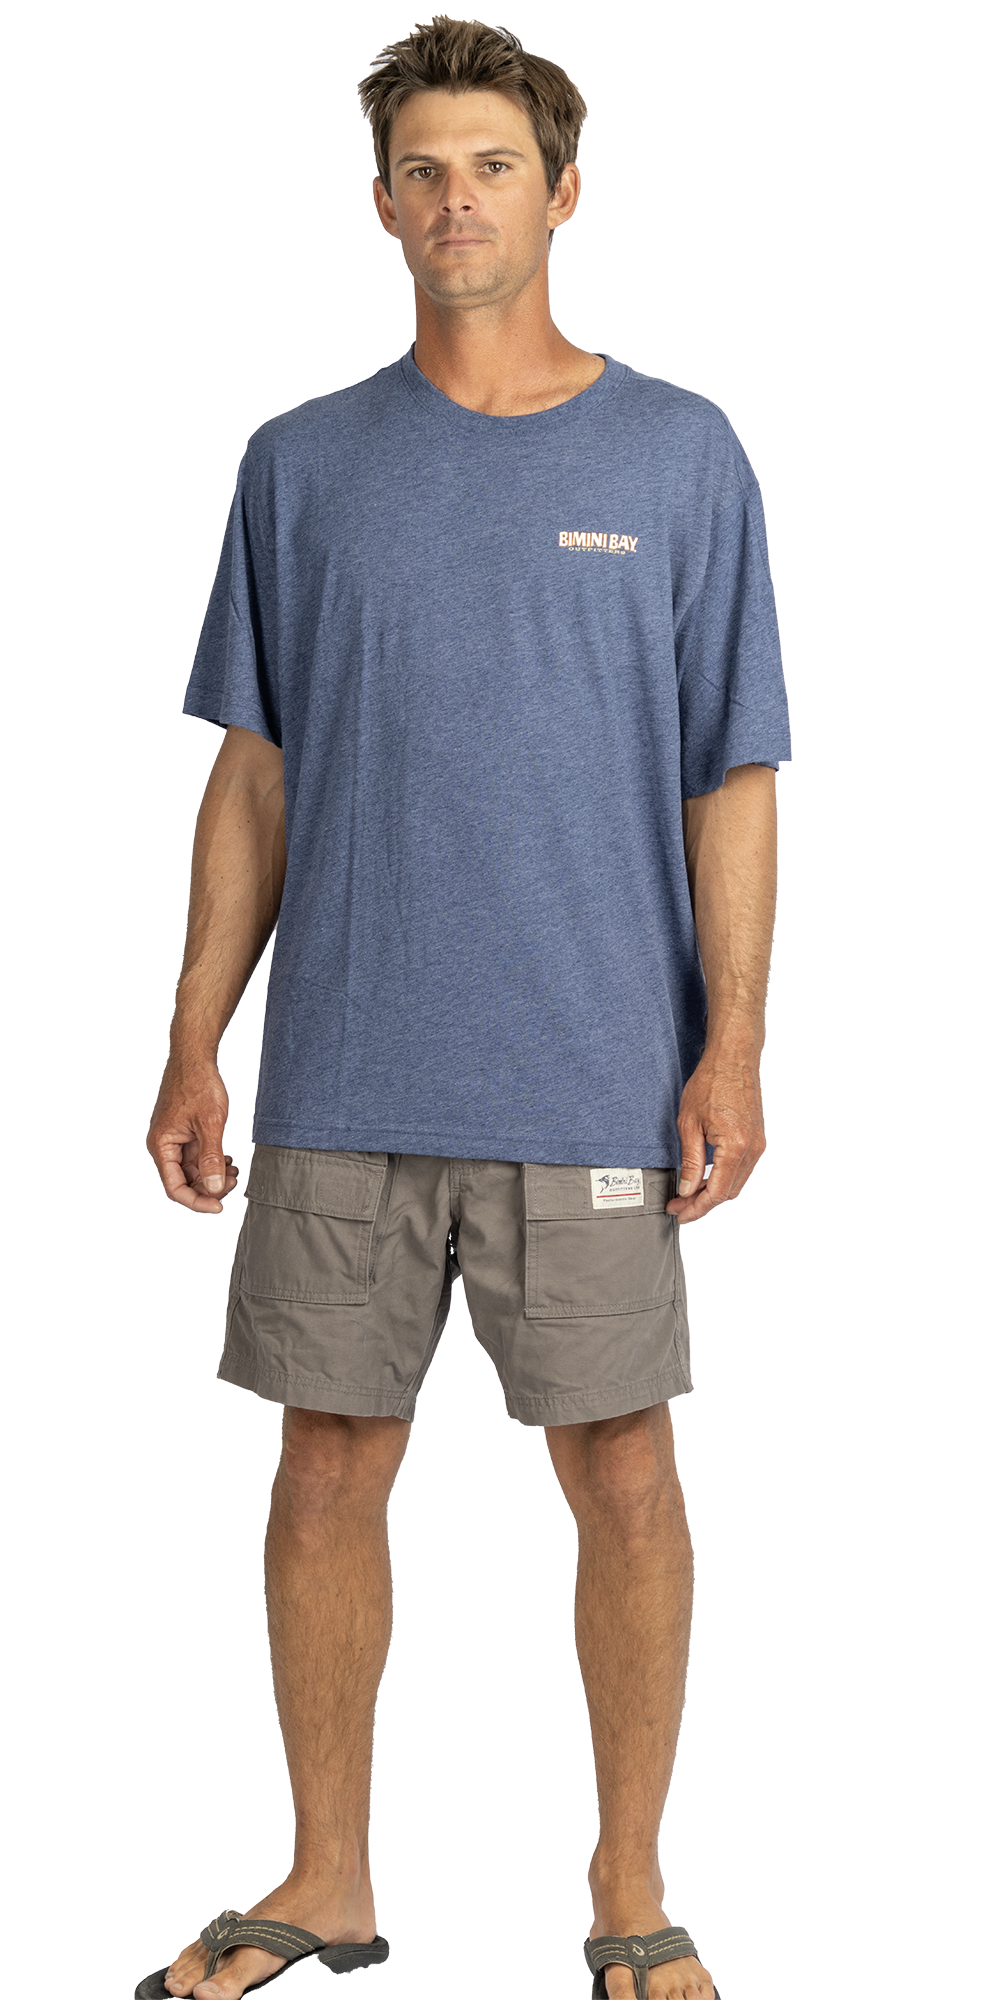 Classic Outfitters Short Sleeve Graphic Tee - Board Shack Dark Blue